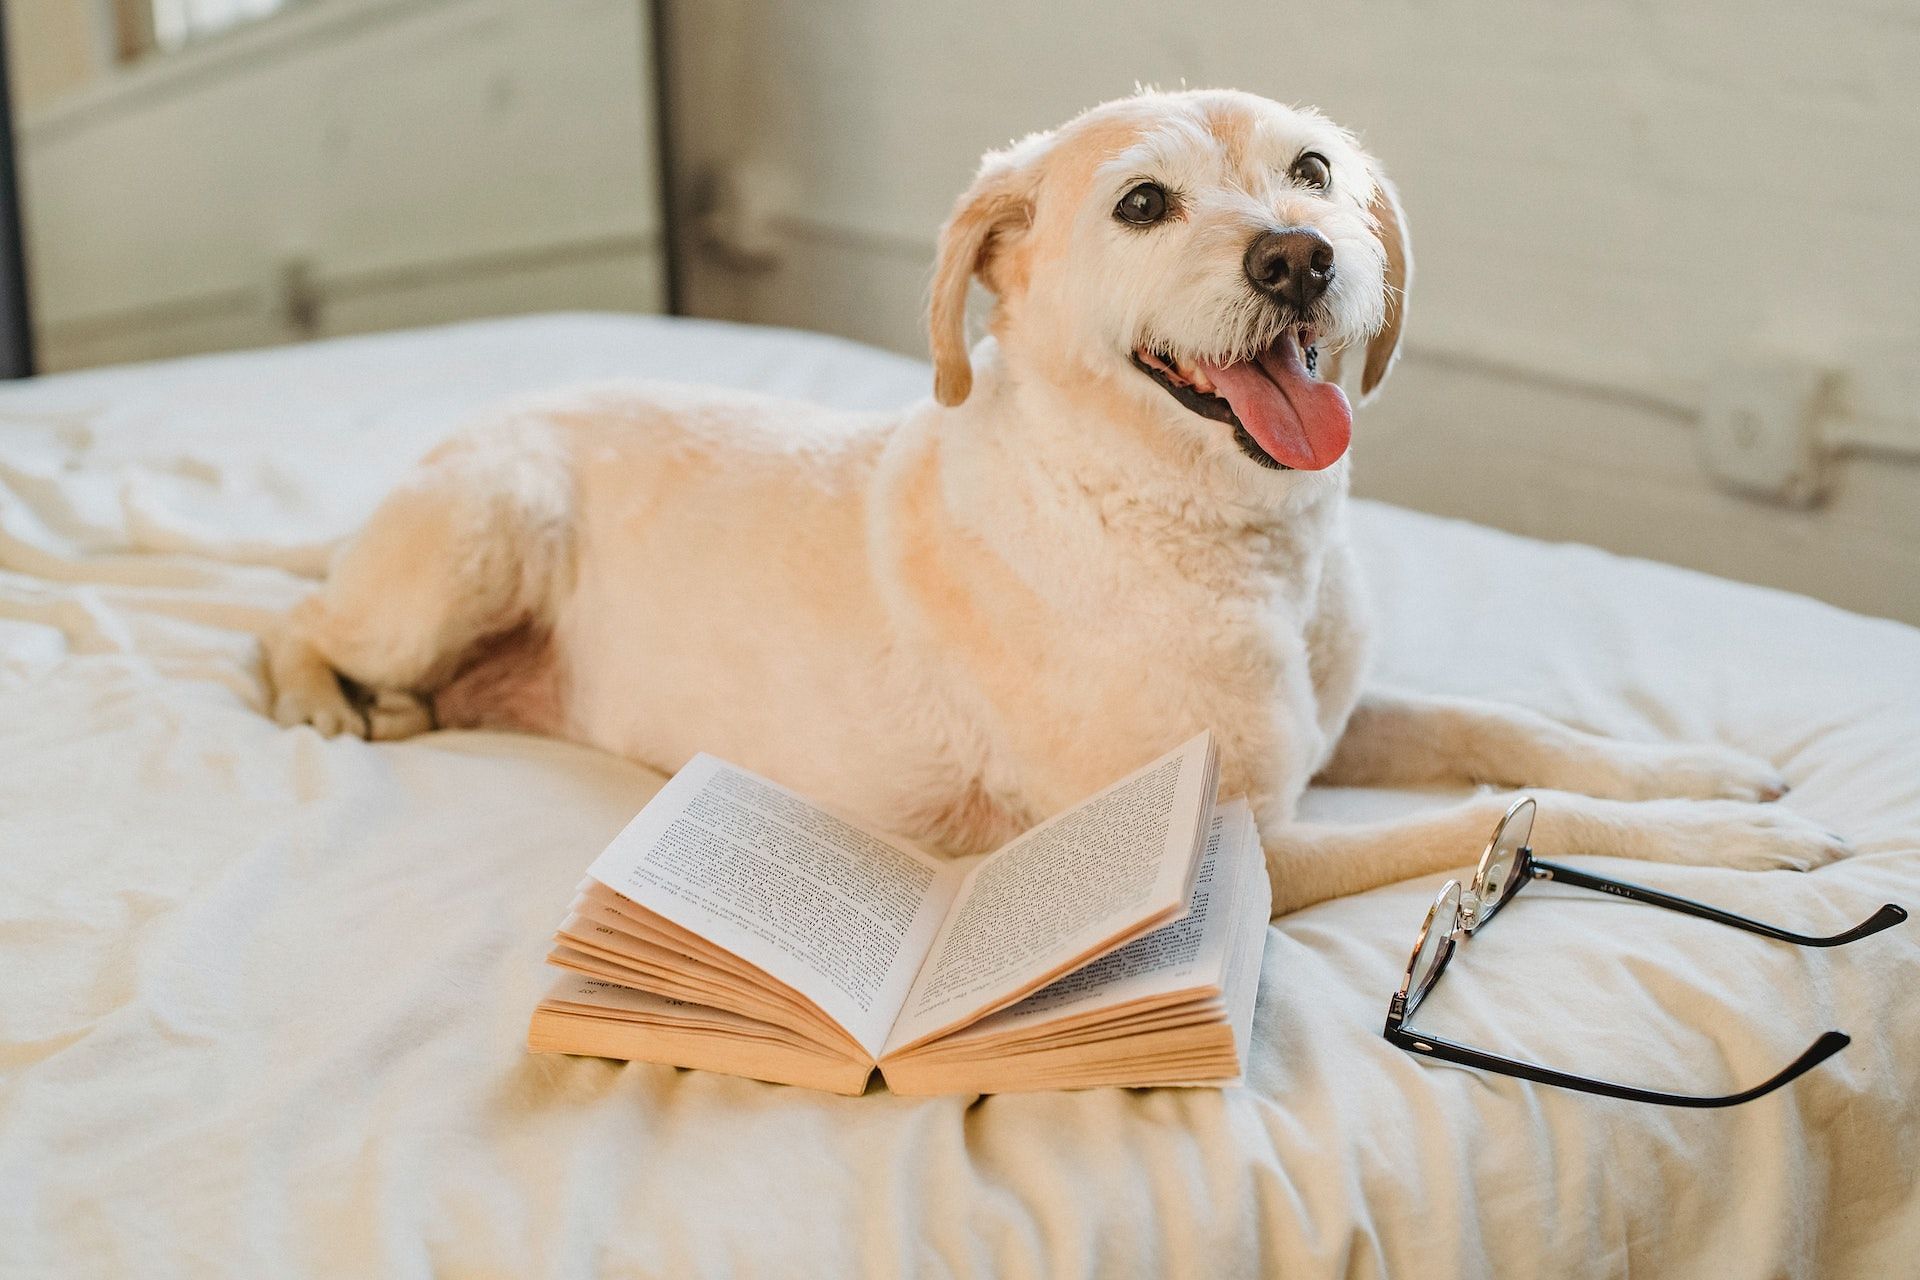 Benefits of having a dog includes reducing stress and promoting happiness. (Photo via Pexels/Samson Katt)